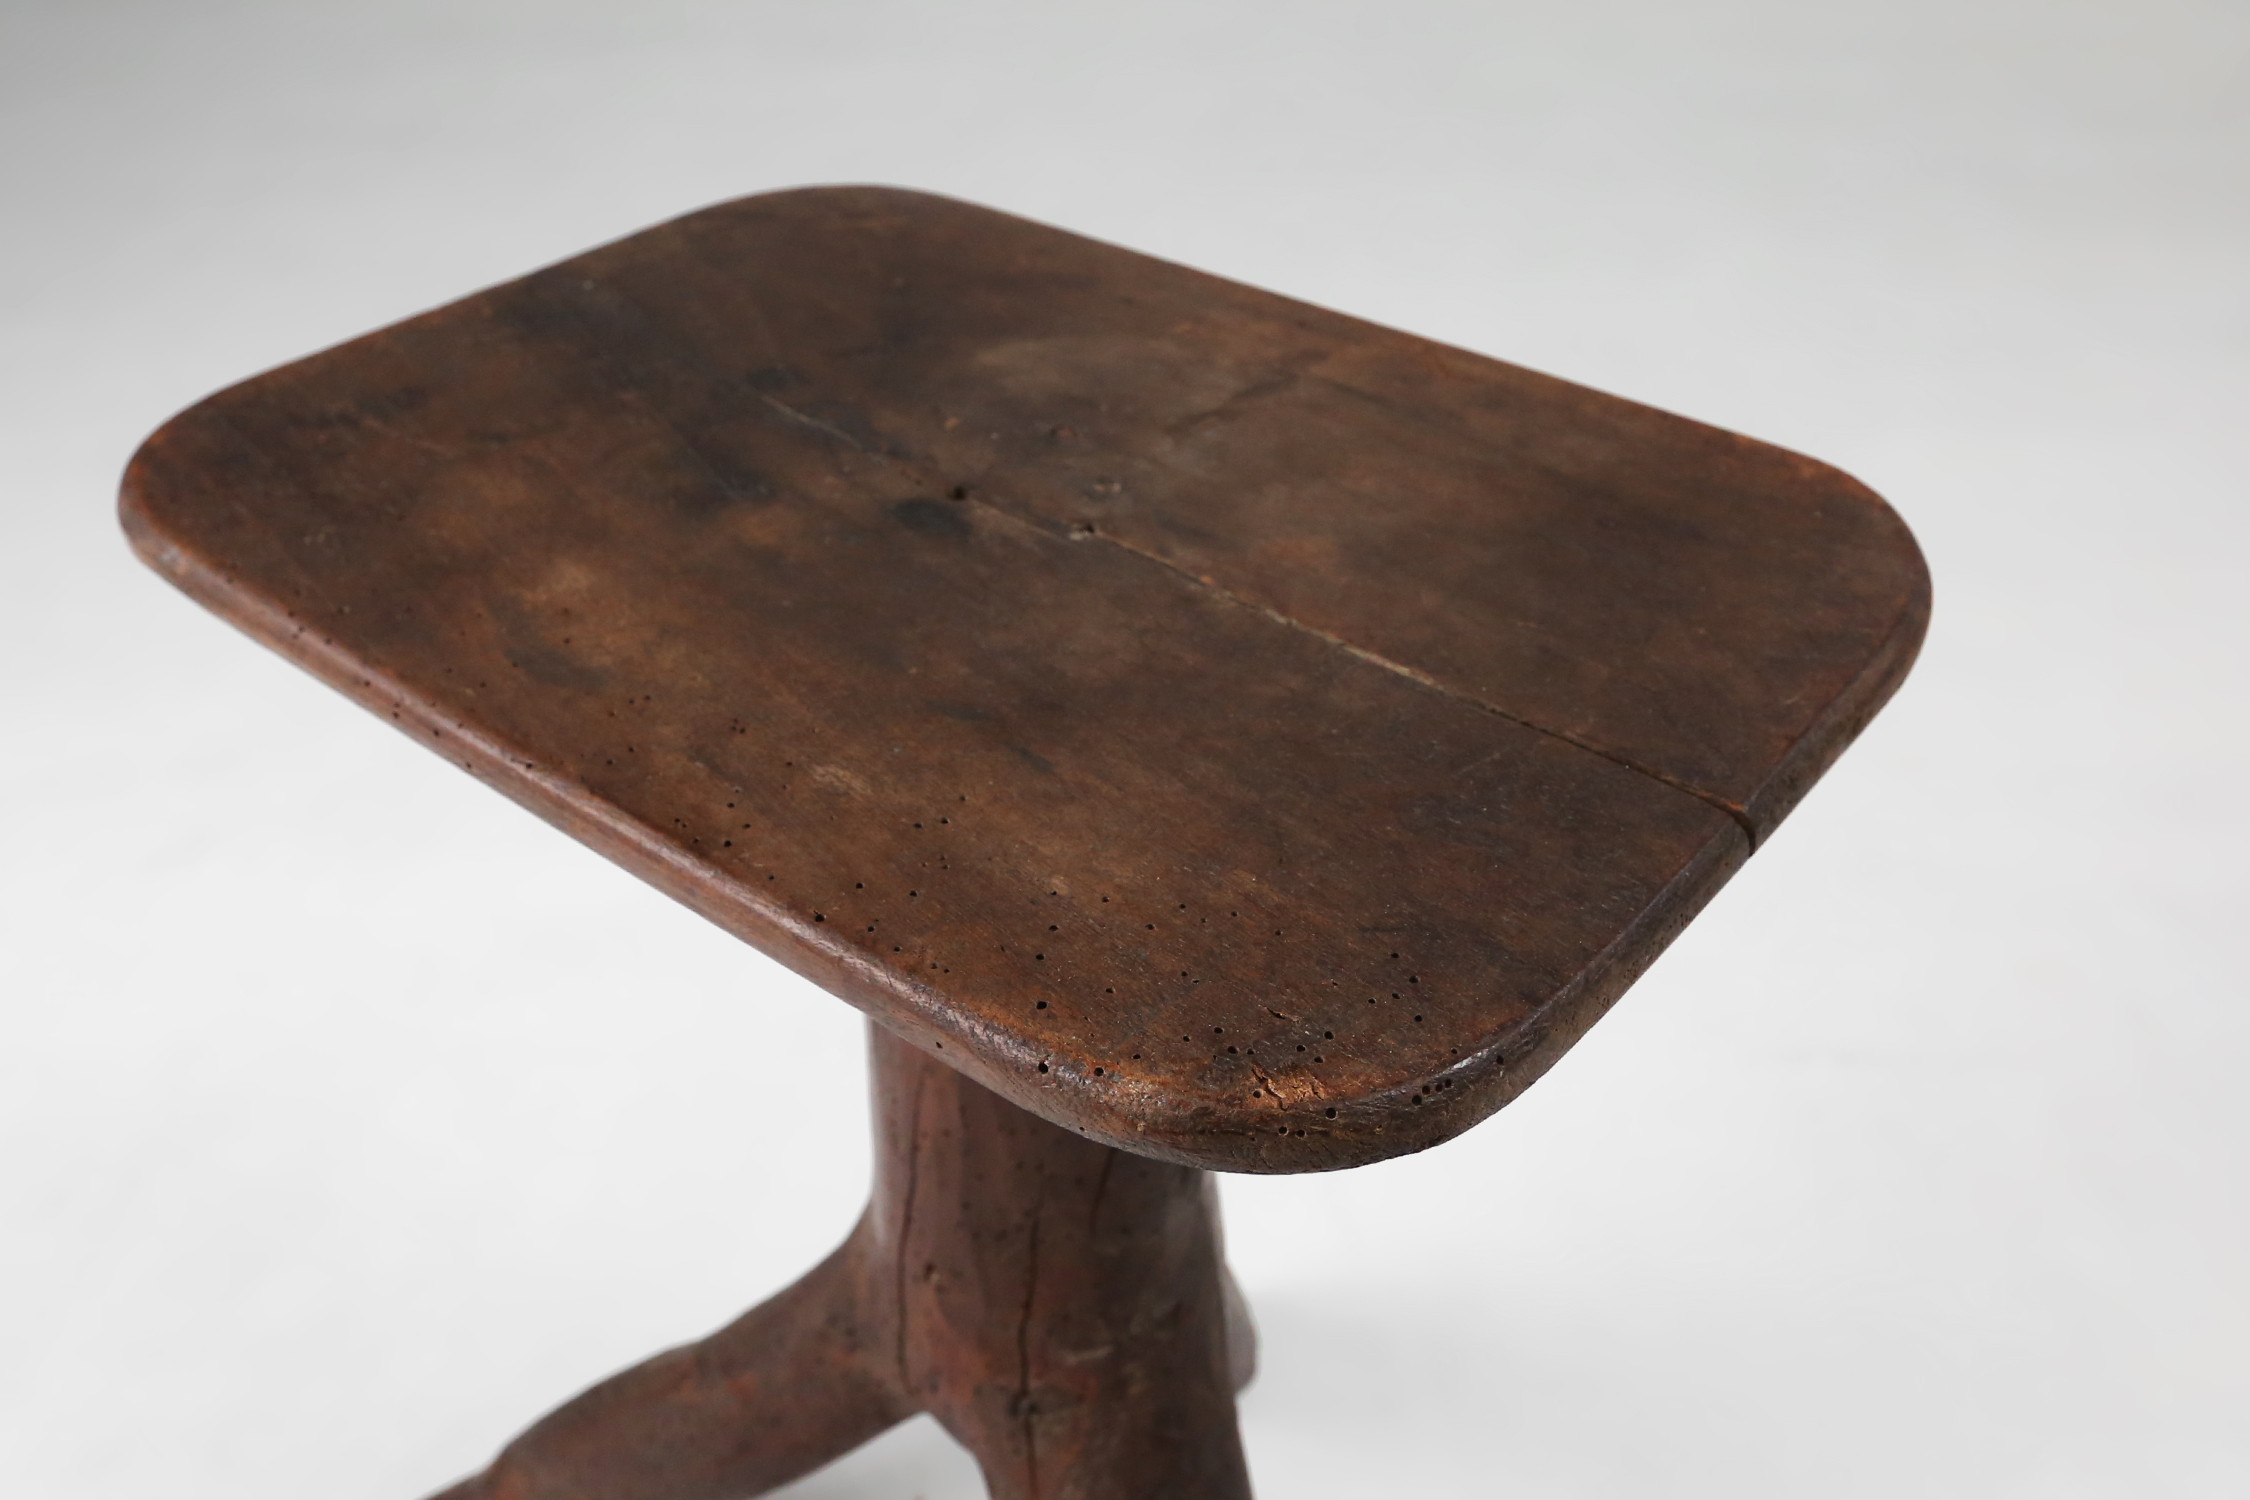 Rustic wooden stool with legs made of a tree branch, France, 1850thumbnail